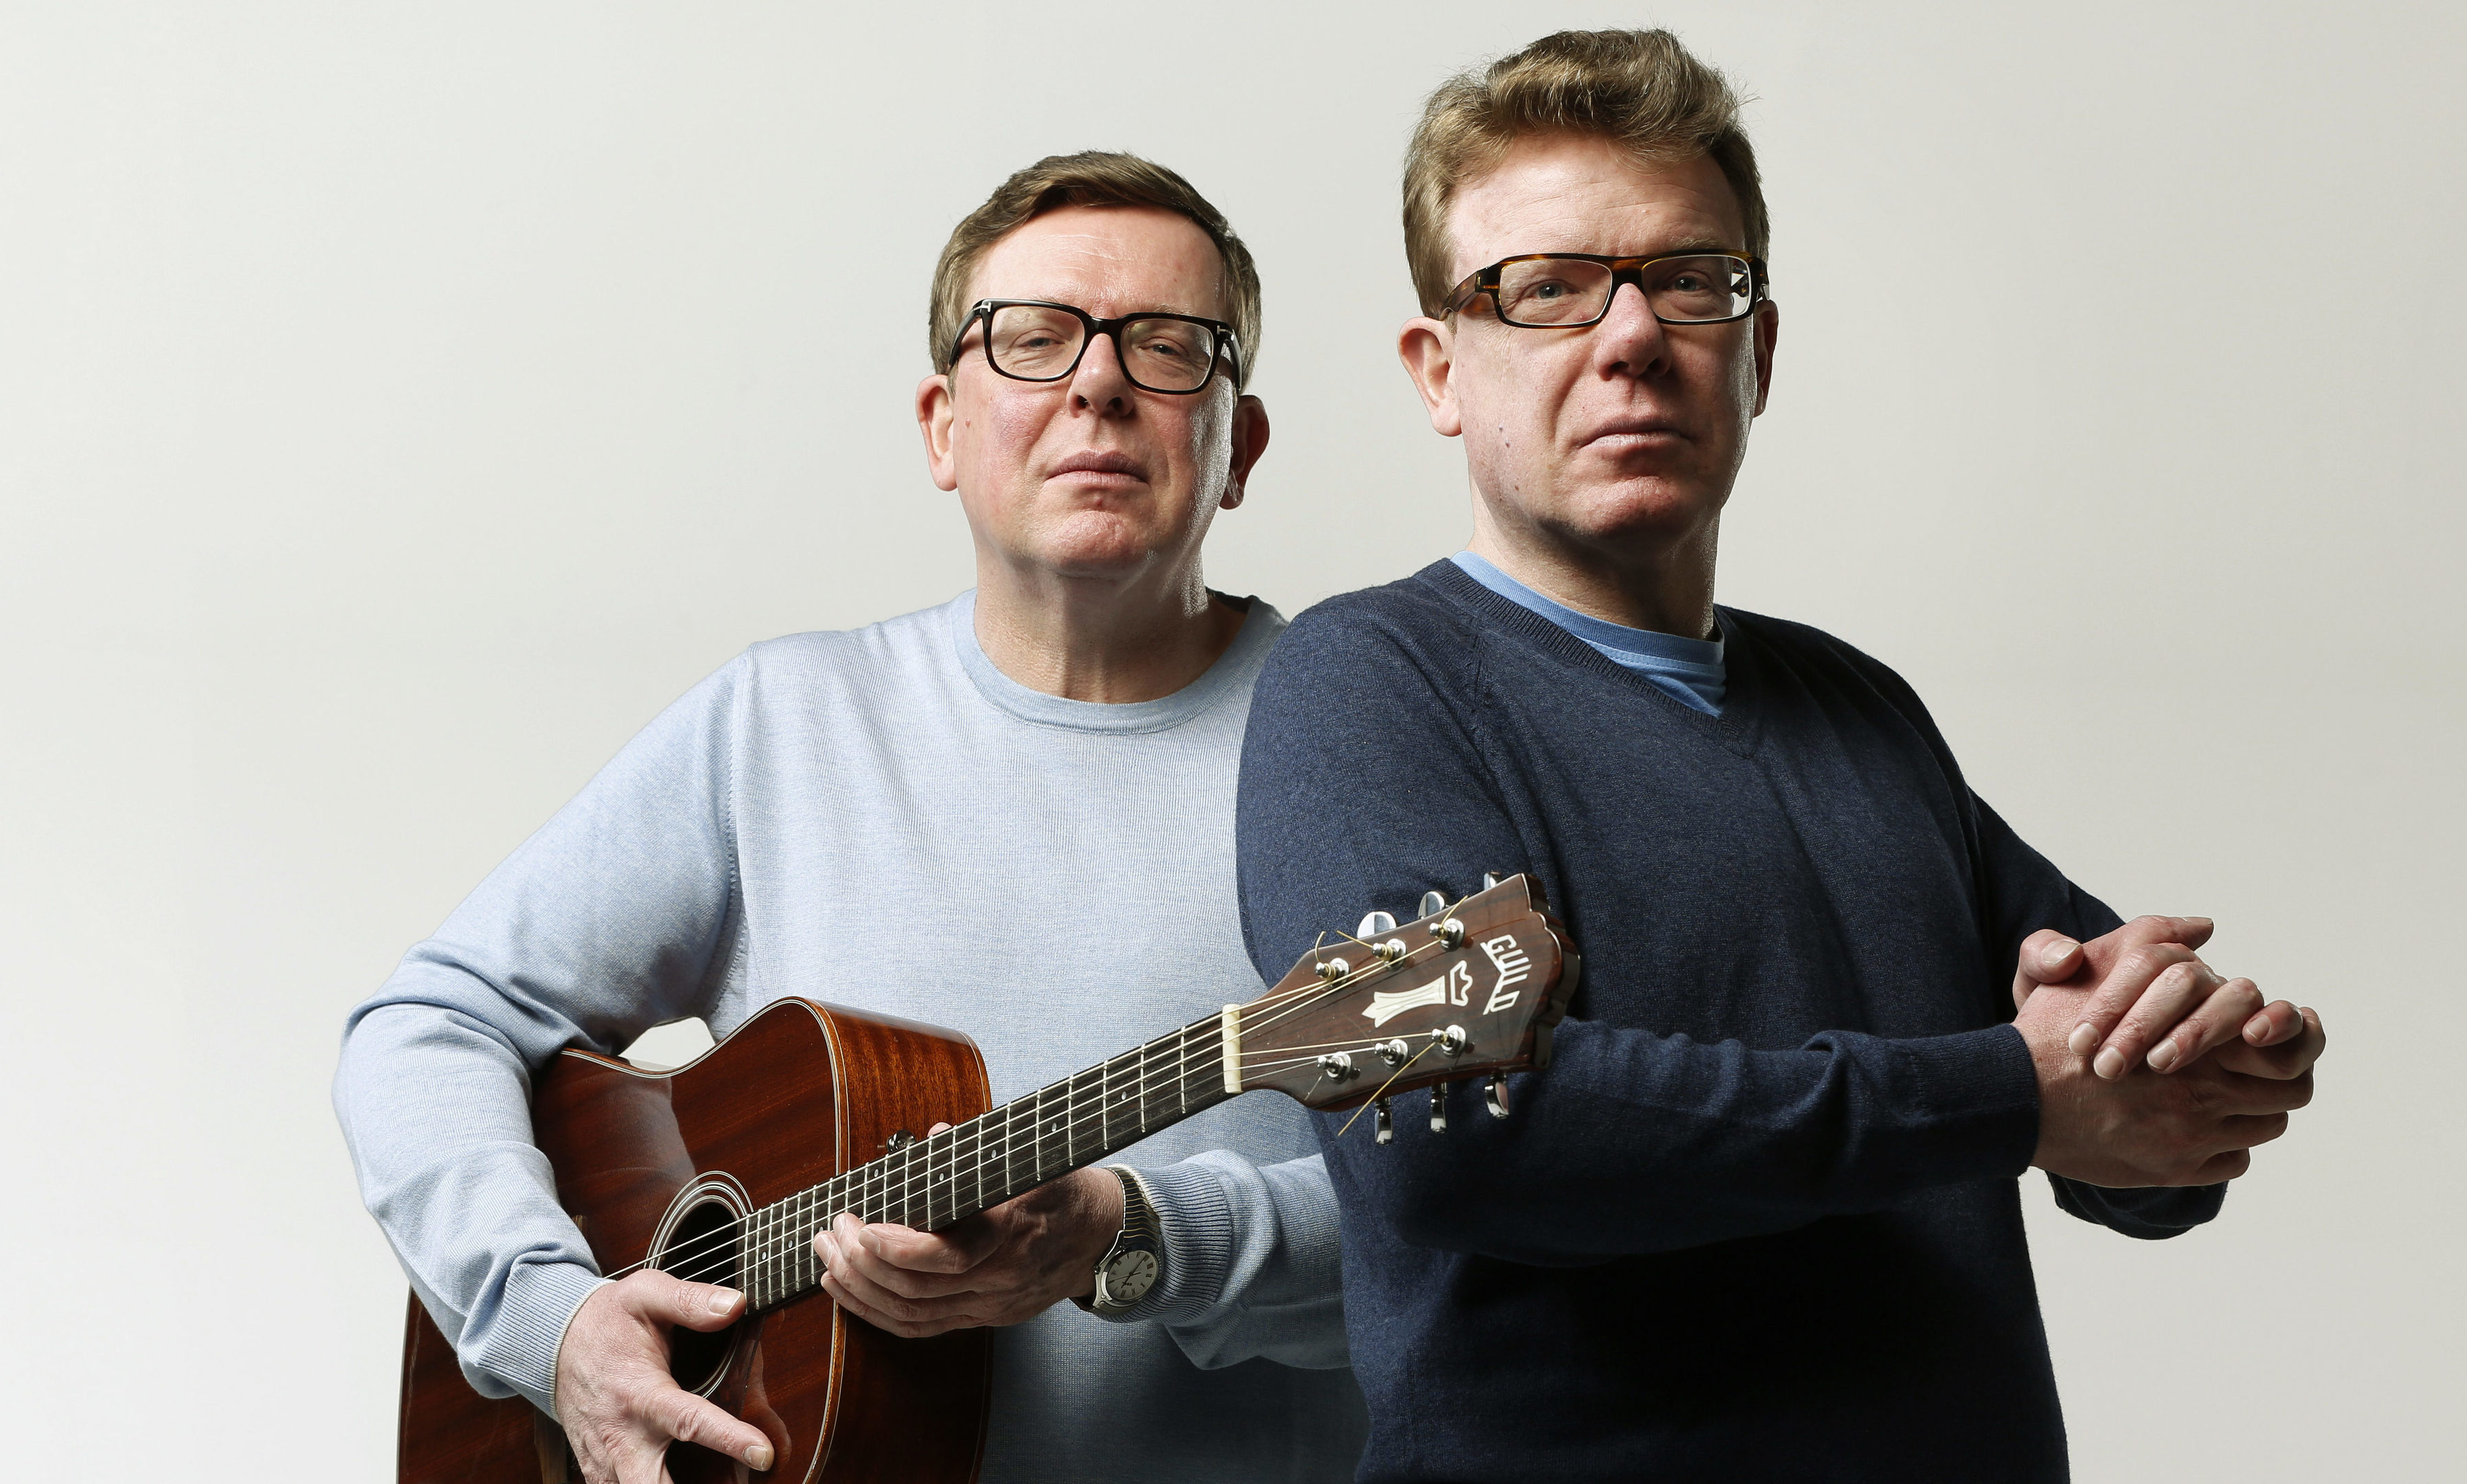 The Proclaimers will perform at three venues in Tayside and Fife, including The Caird Hall in Dundee.